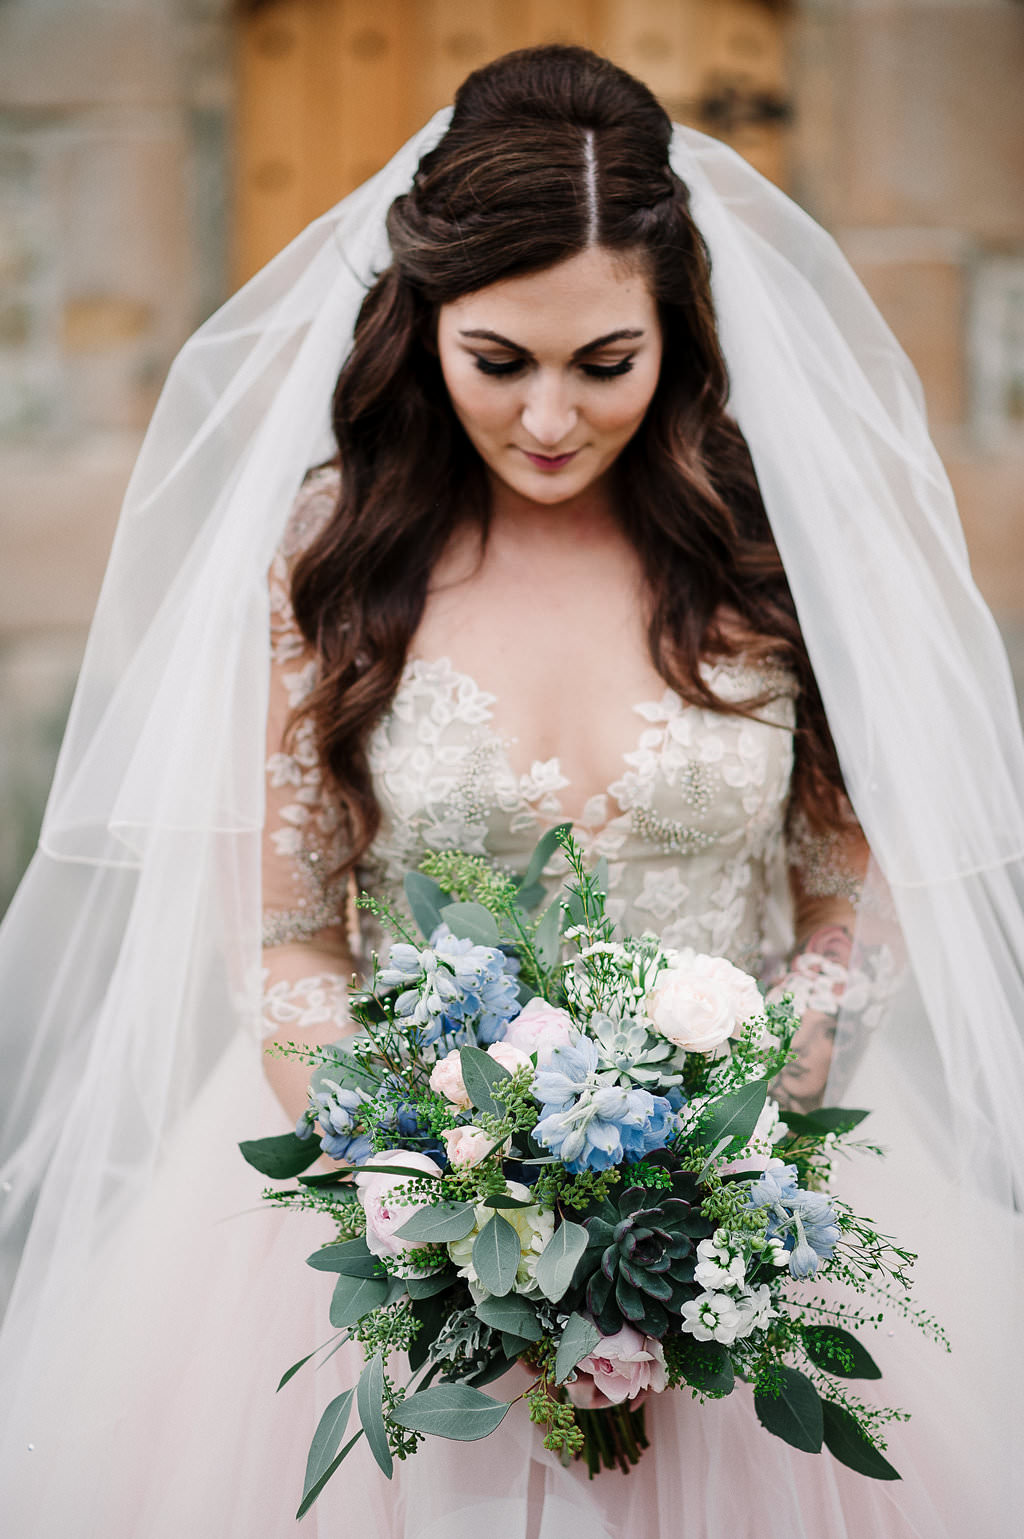 Detailed photo of wedding dress and flowers. Ribble Valley wedding